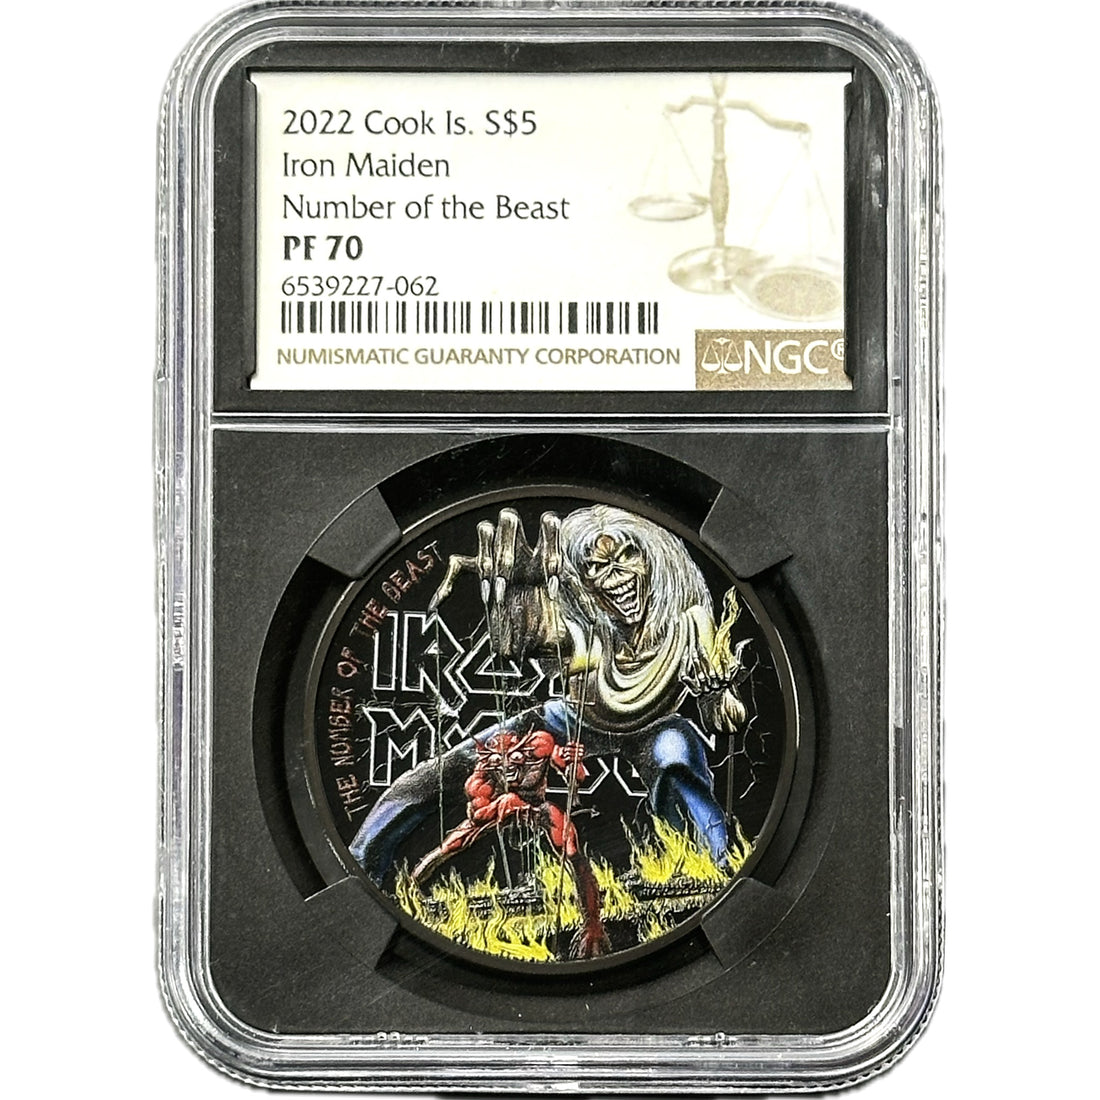 2022 Cook Island NUMBER OF THE BEAST - IRON MAIDEN 1 oz Silver Coin PF 70 - OZB